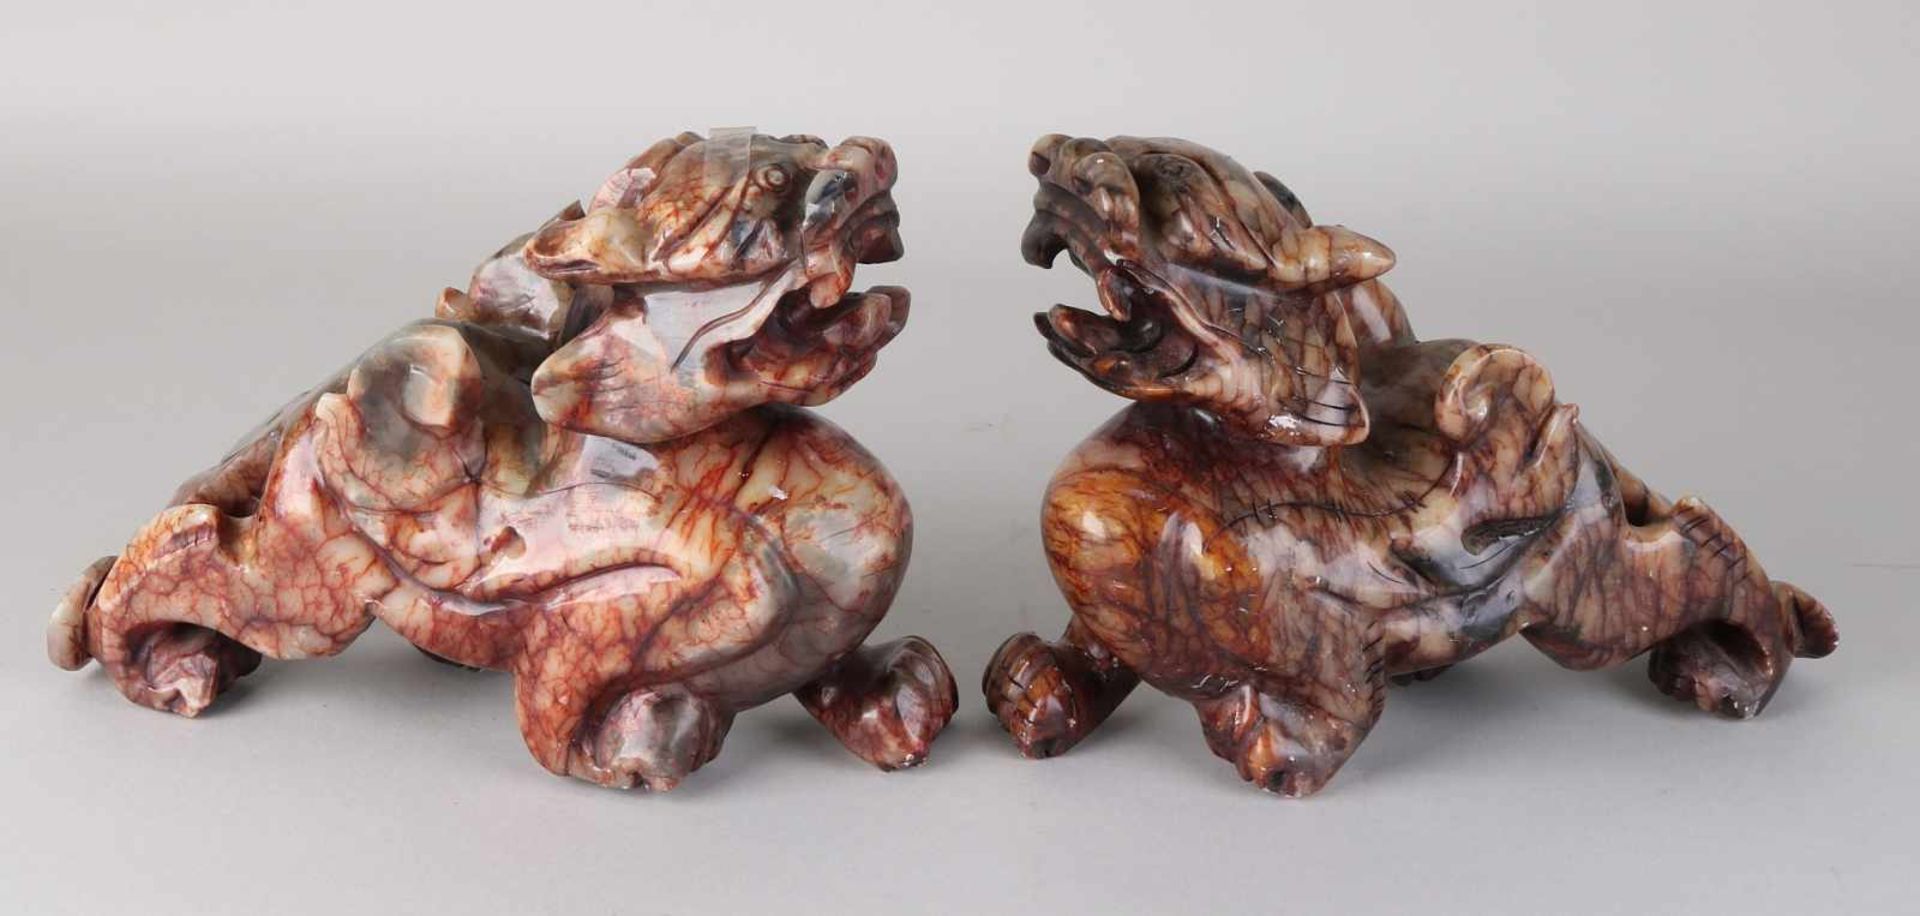 Two large Chinese marble Foo dogs. 20th century. Dimensions: 20 x 26 x 8 cm. In good condition.